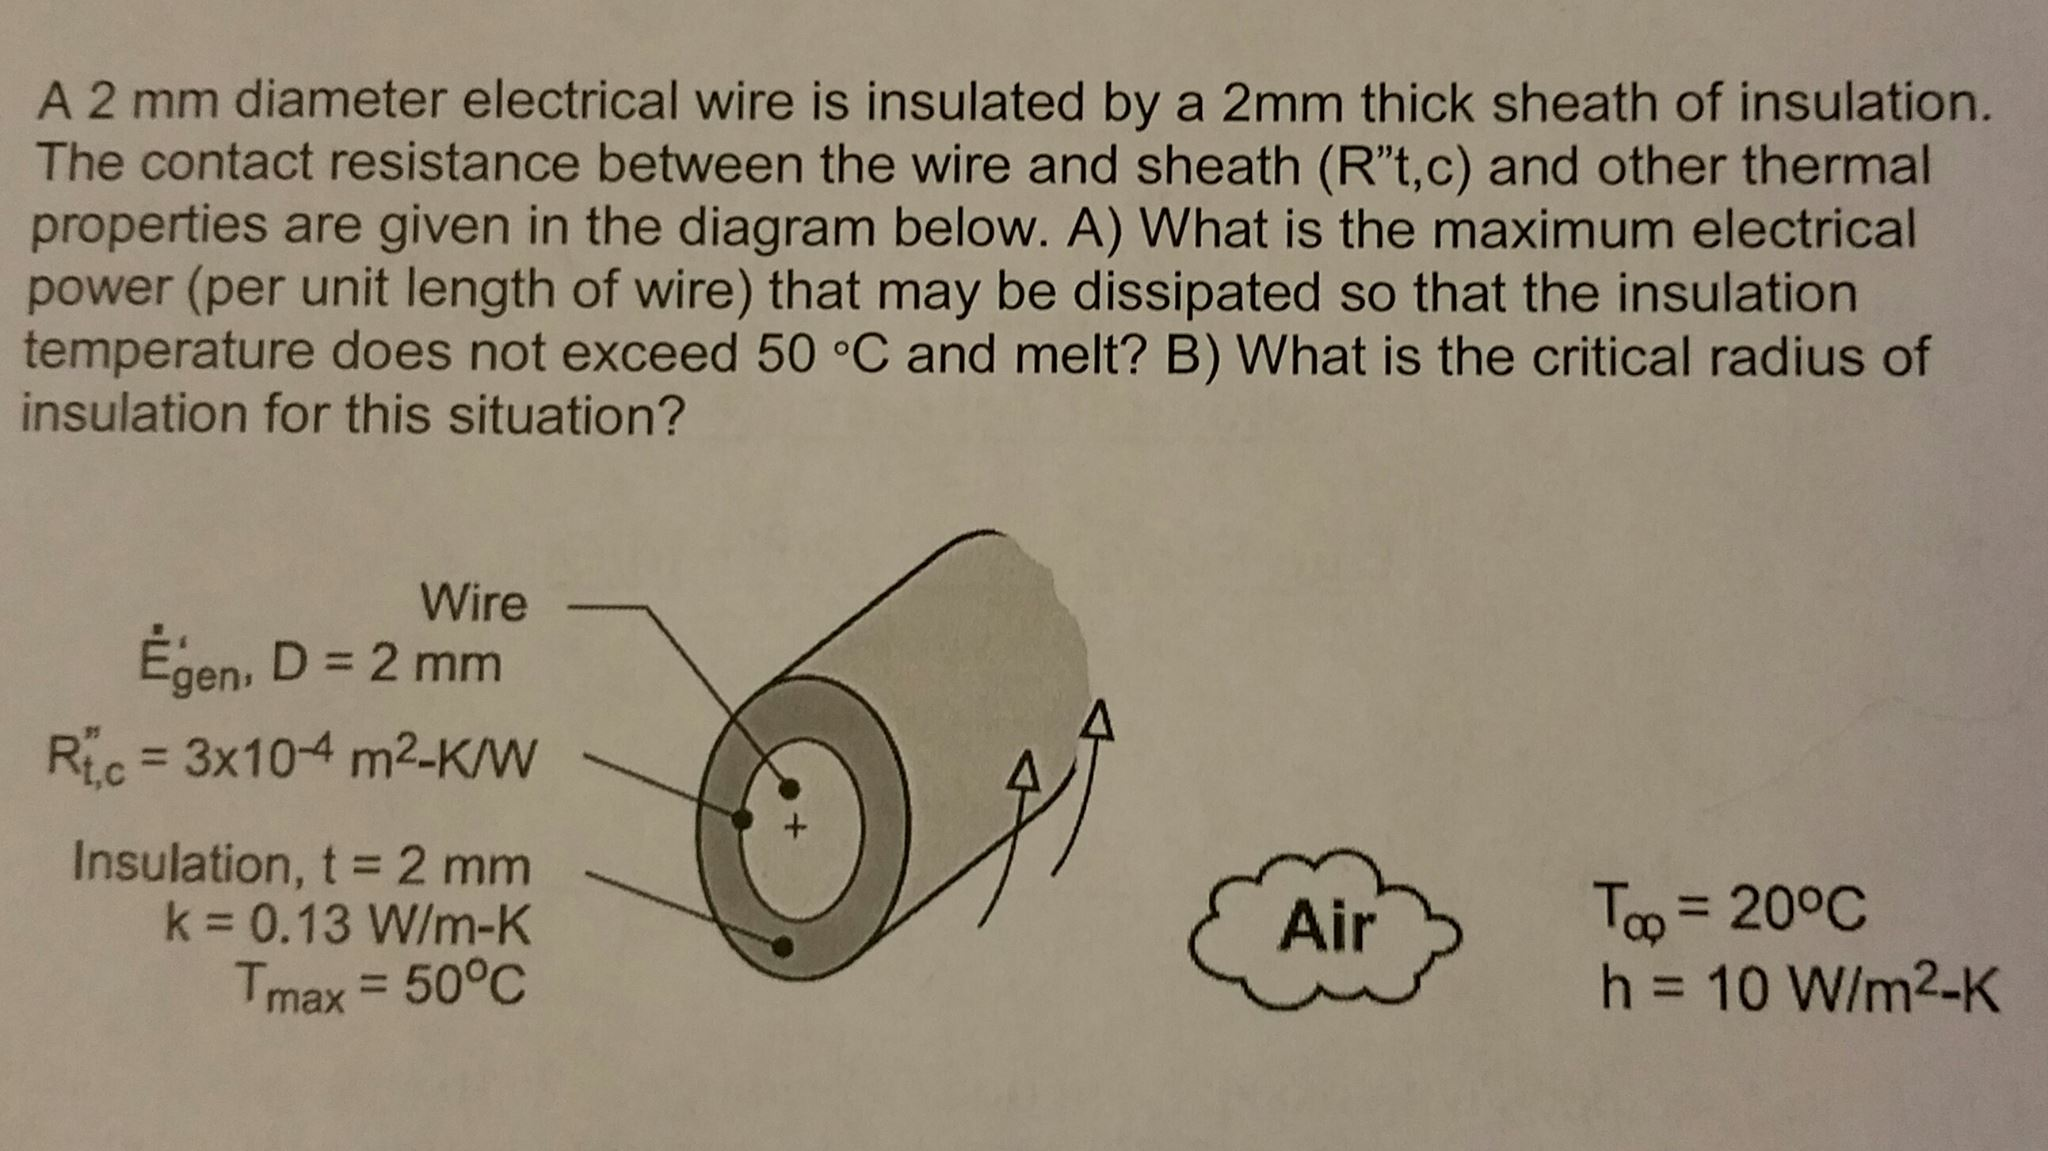 A 2 mm diameter electrical wire is insulated by a 2mm